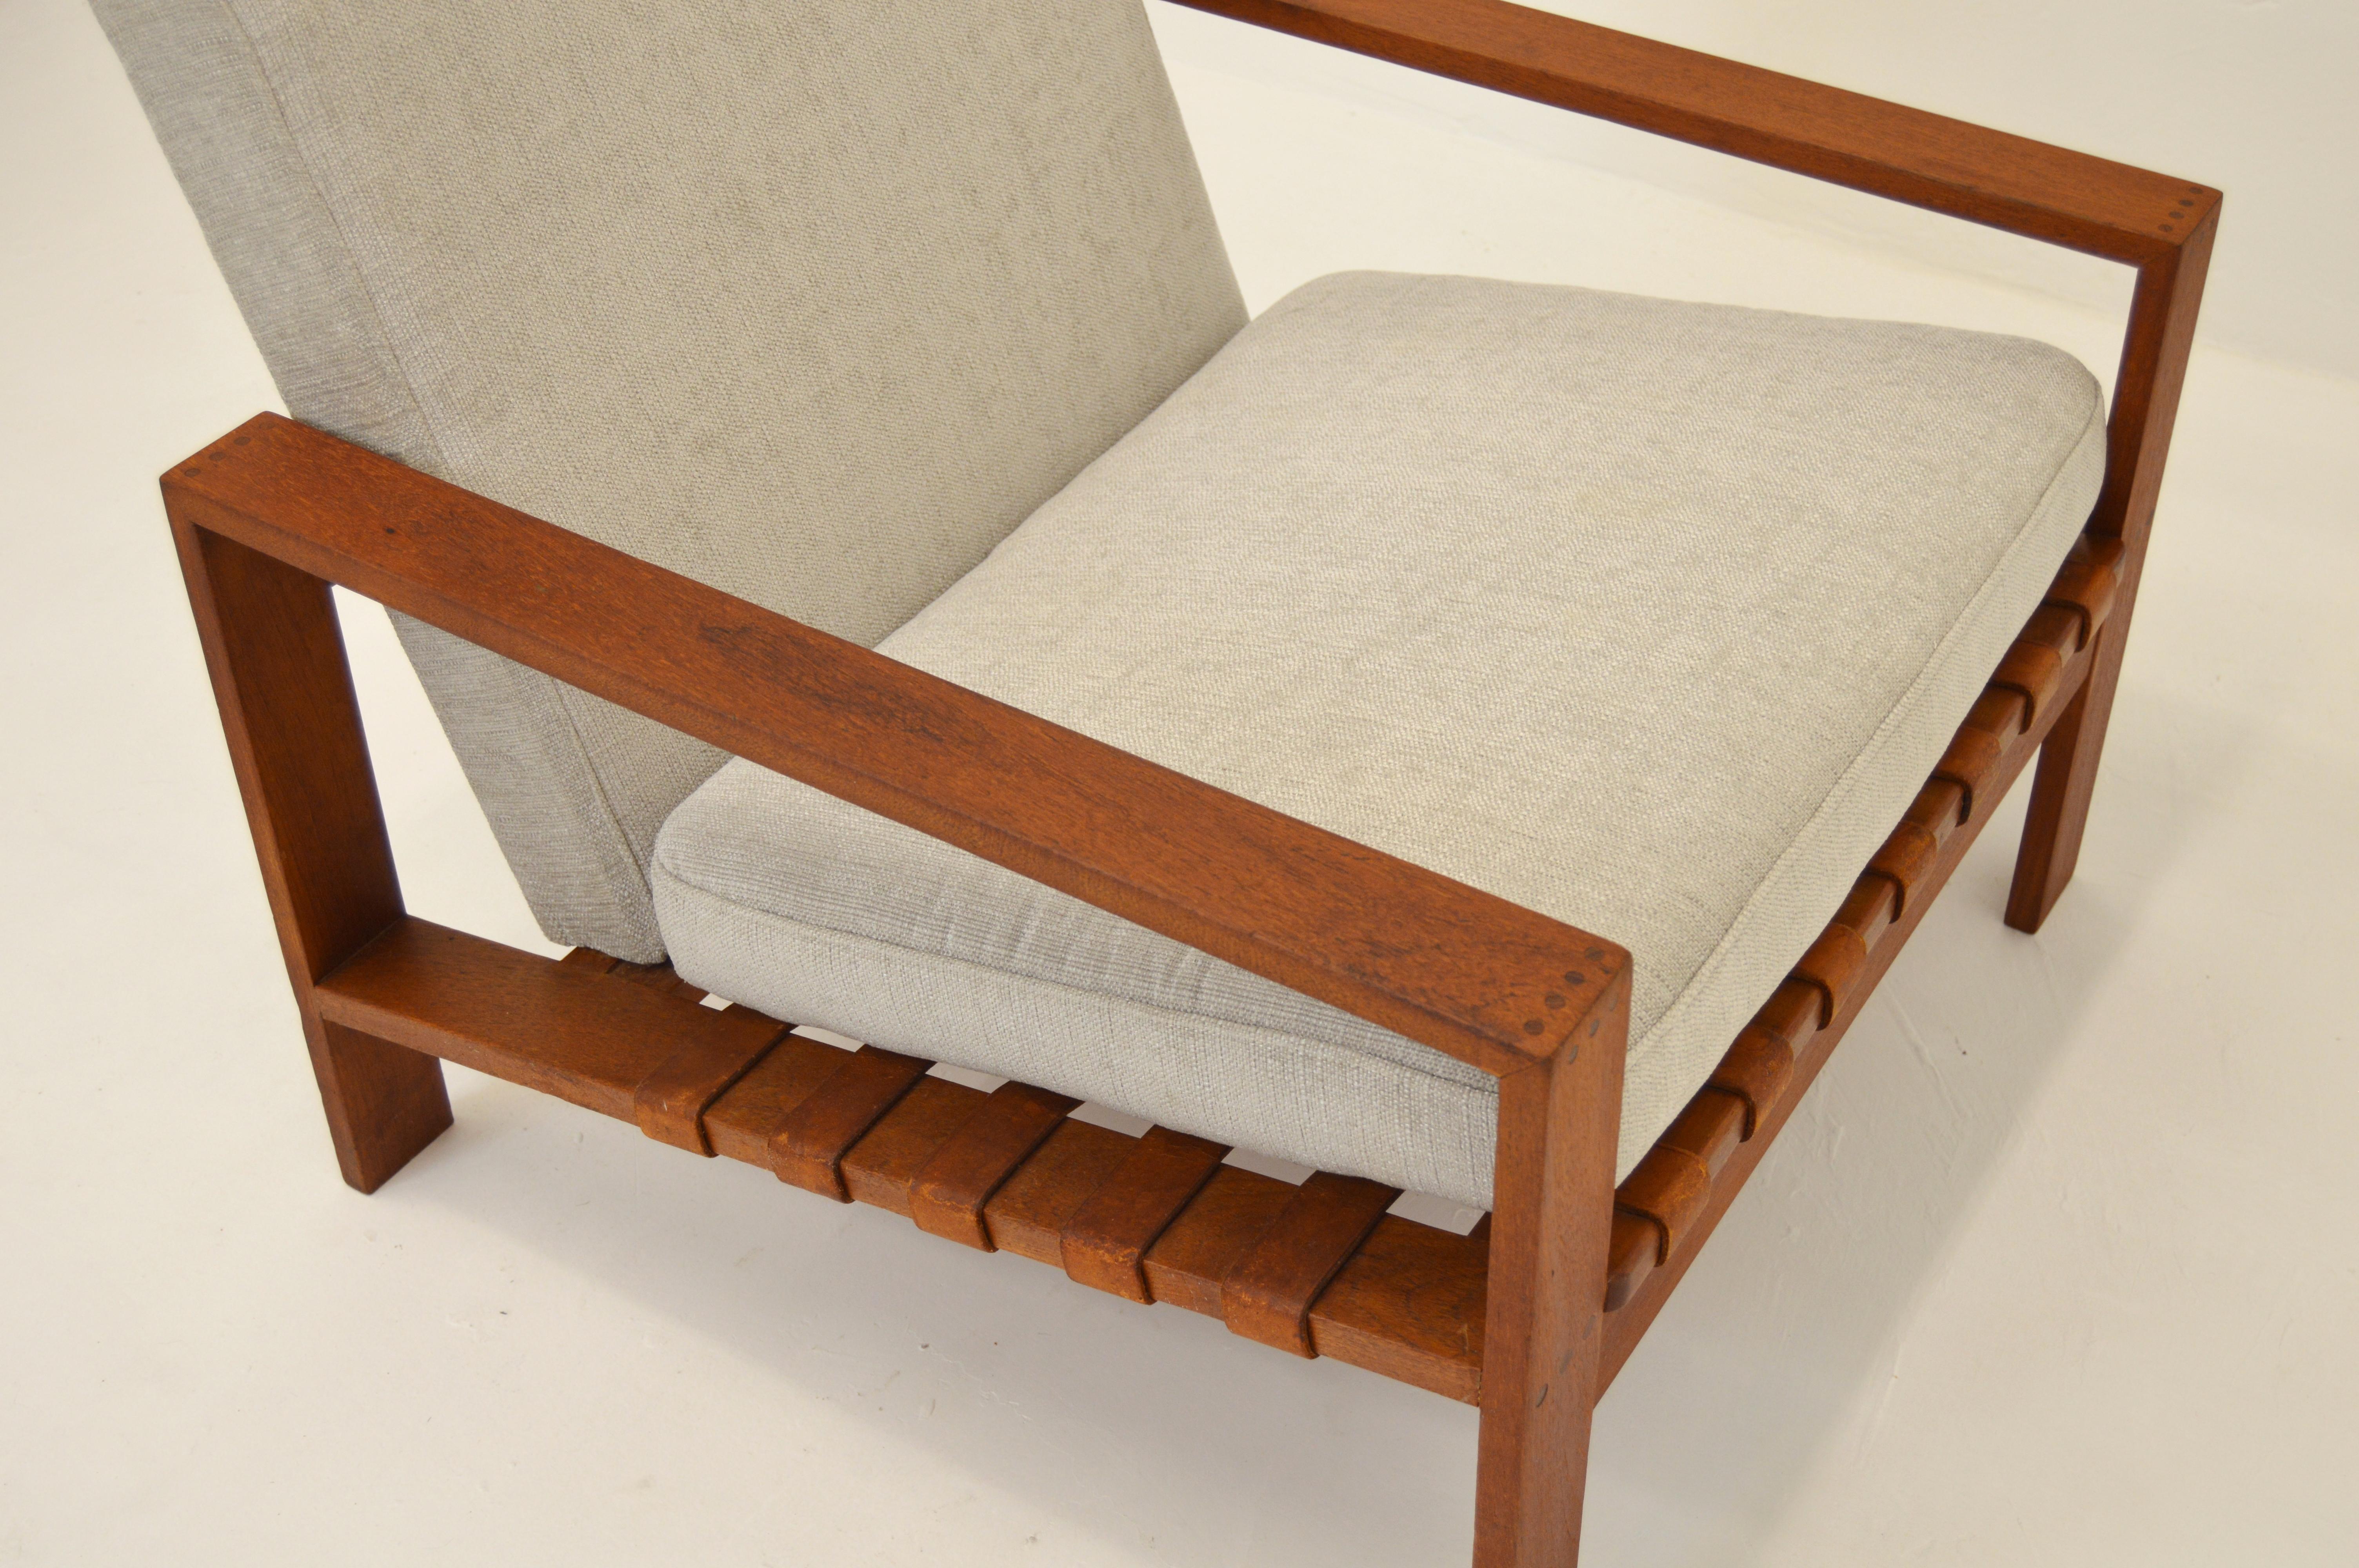 Mid-20th Century Midcentury Svante Skogh Easy Chair with Leather Webbing For Sale